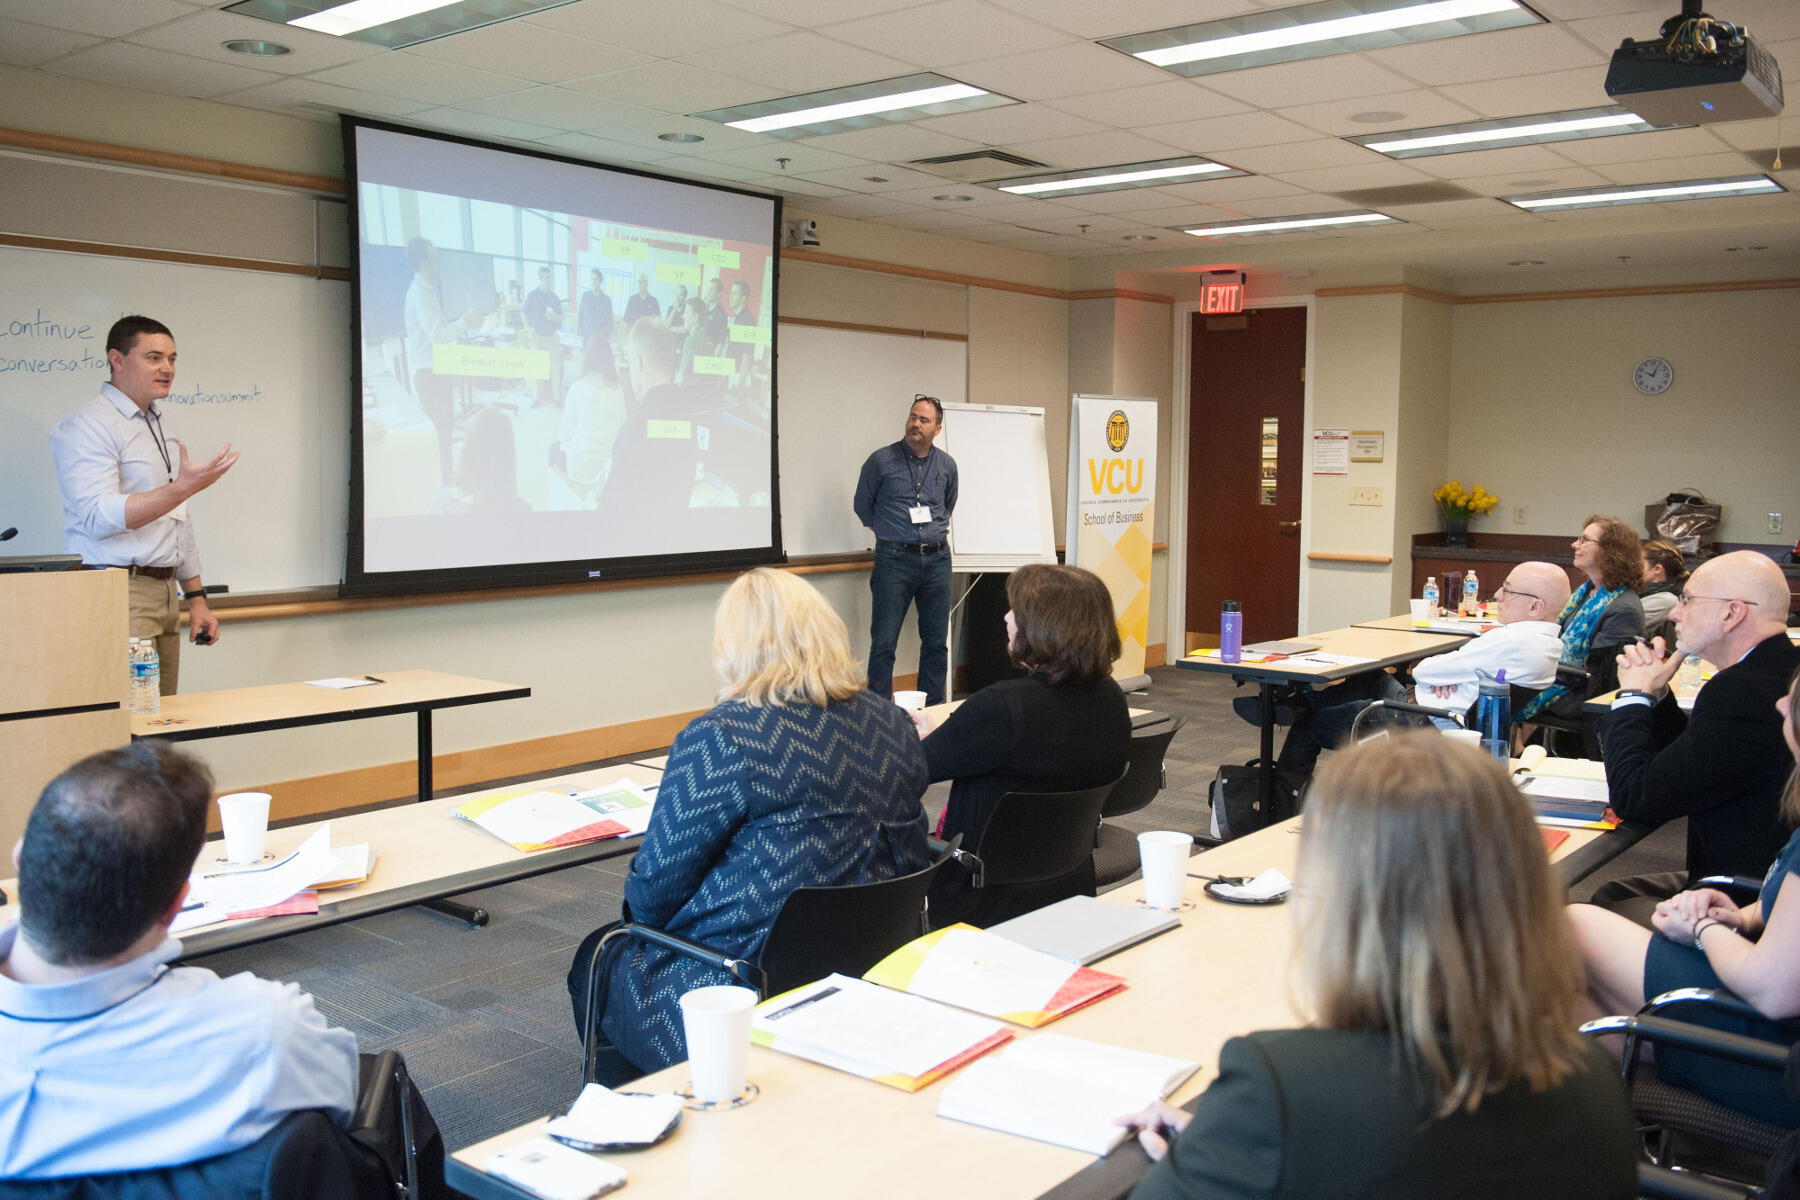 Eric Harrigan, Carmax's director of product management, and Chip Trout, manager of interaction design at Carmax, speak to attendees about igniting creativity in the workplace at the 2016 VCU Innovation Summit.